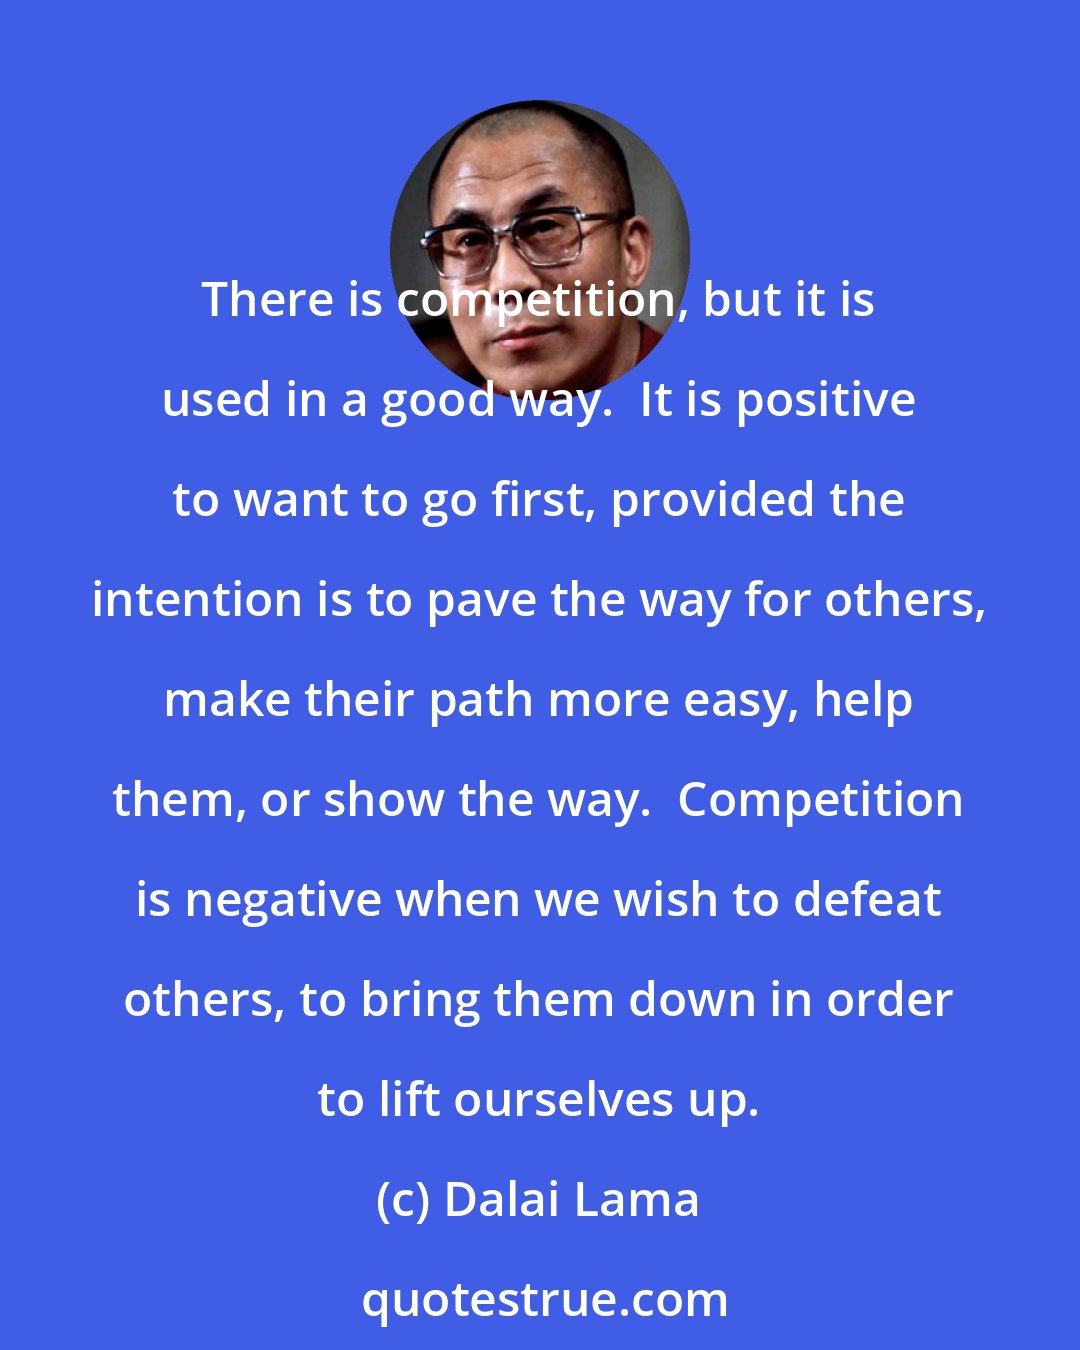 Dalai Lama: There is competition, but it is used in a good way.  It is positive to want to go first, provided the intention is to pave the way for others, make their path more easy, help them, or show the way.  Competition is negative when we wish to defeat others, to bring them down in order to lift ourselves up.